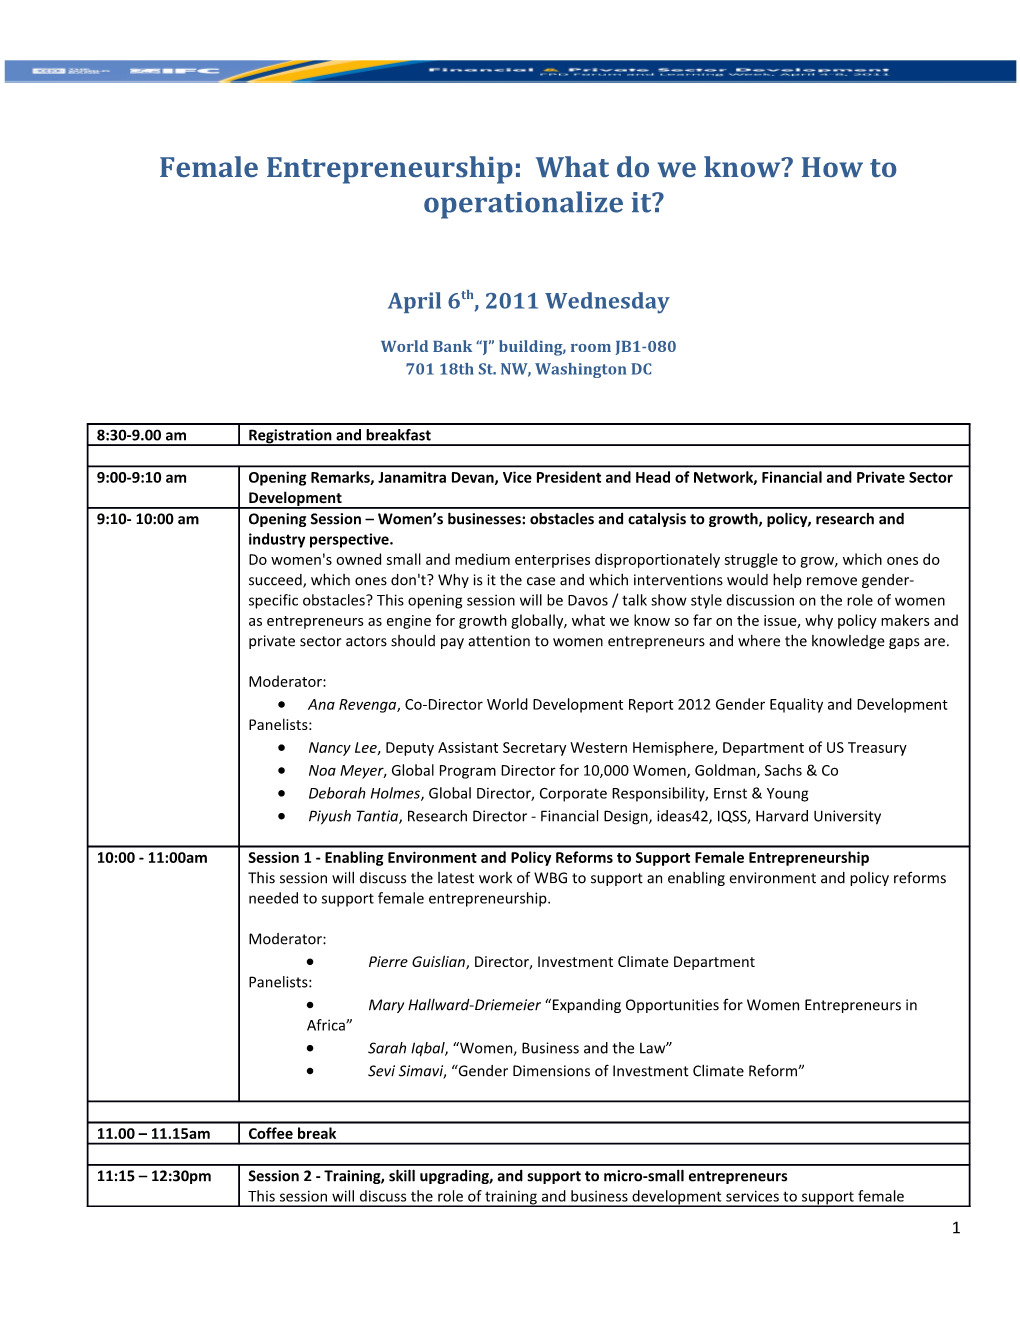 Female Entrepreneurship: What Do We Know? How to Operationalize It?